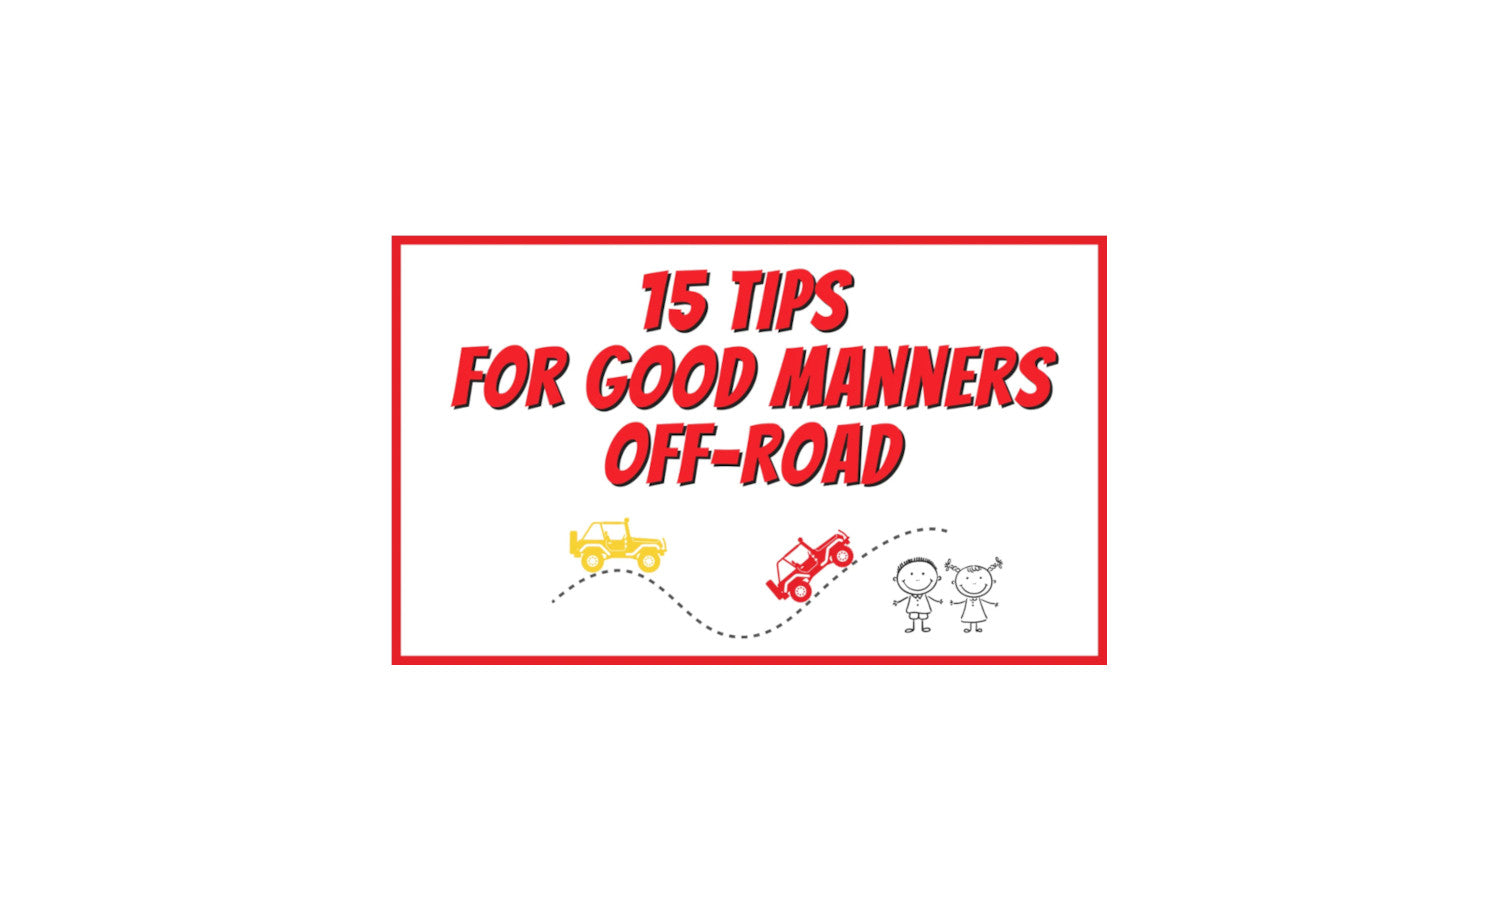 15 Tips for Good Manners Off-Road